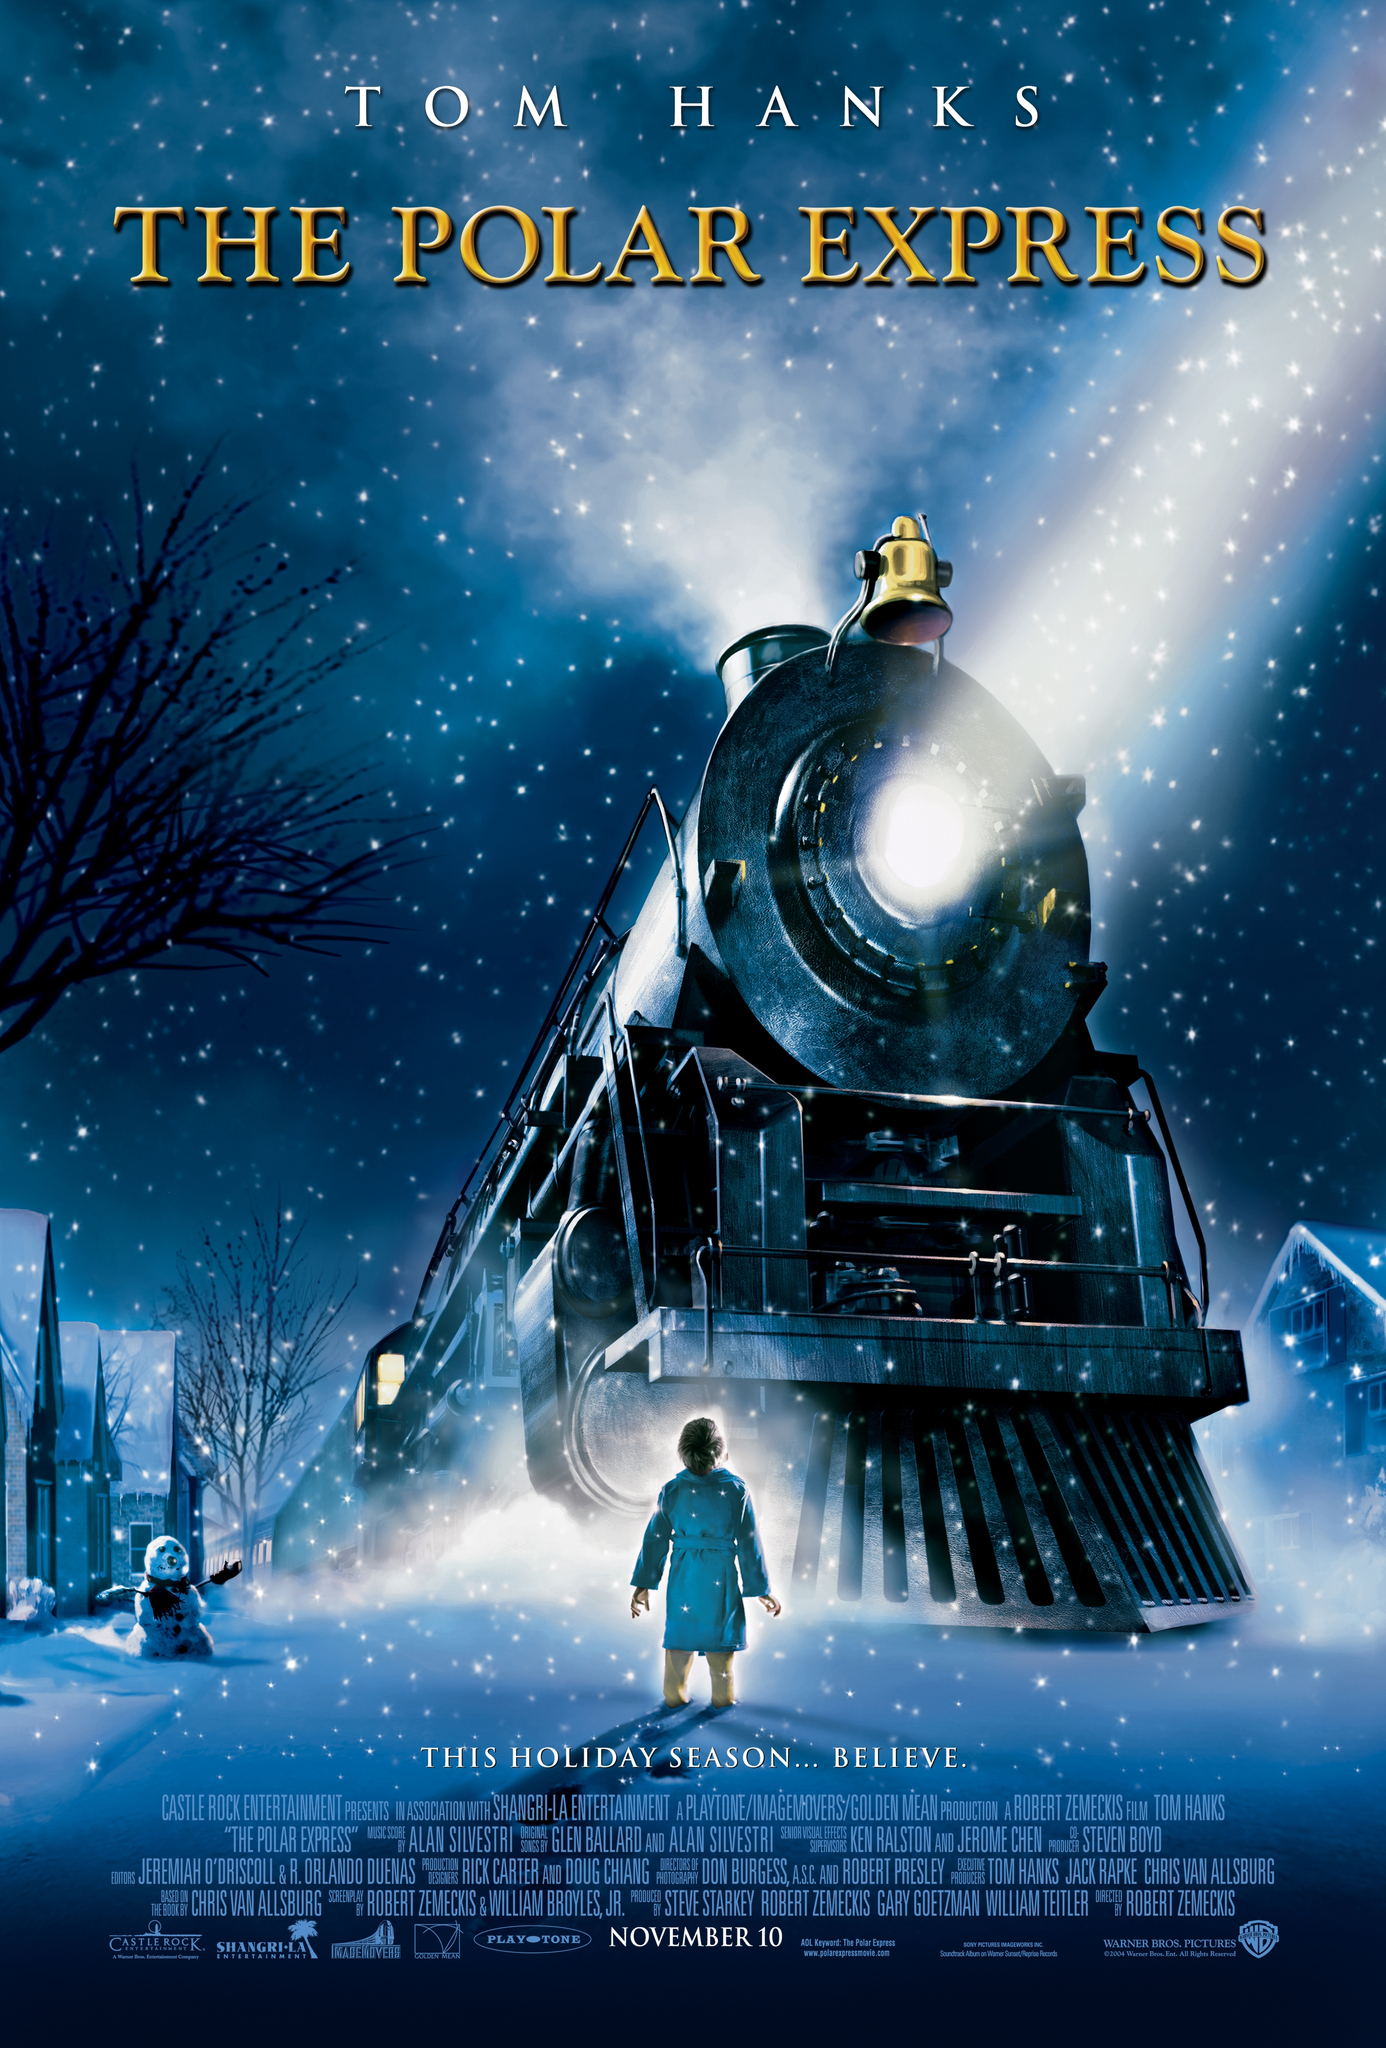 Best Christmas animated movies - The Polar Express